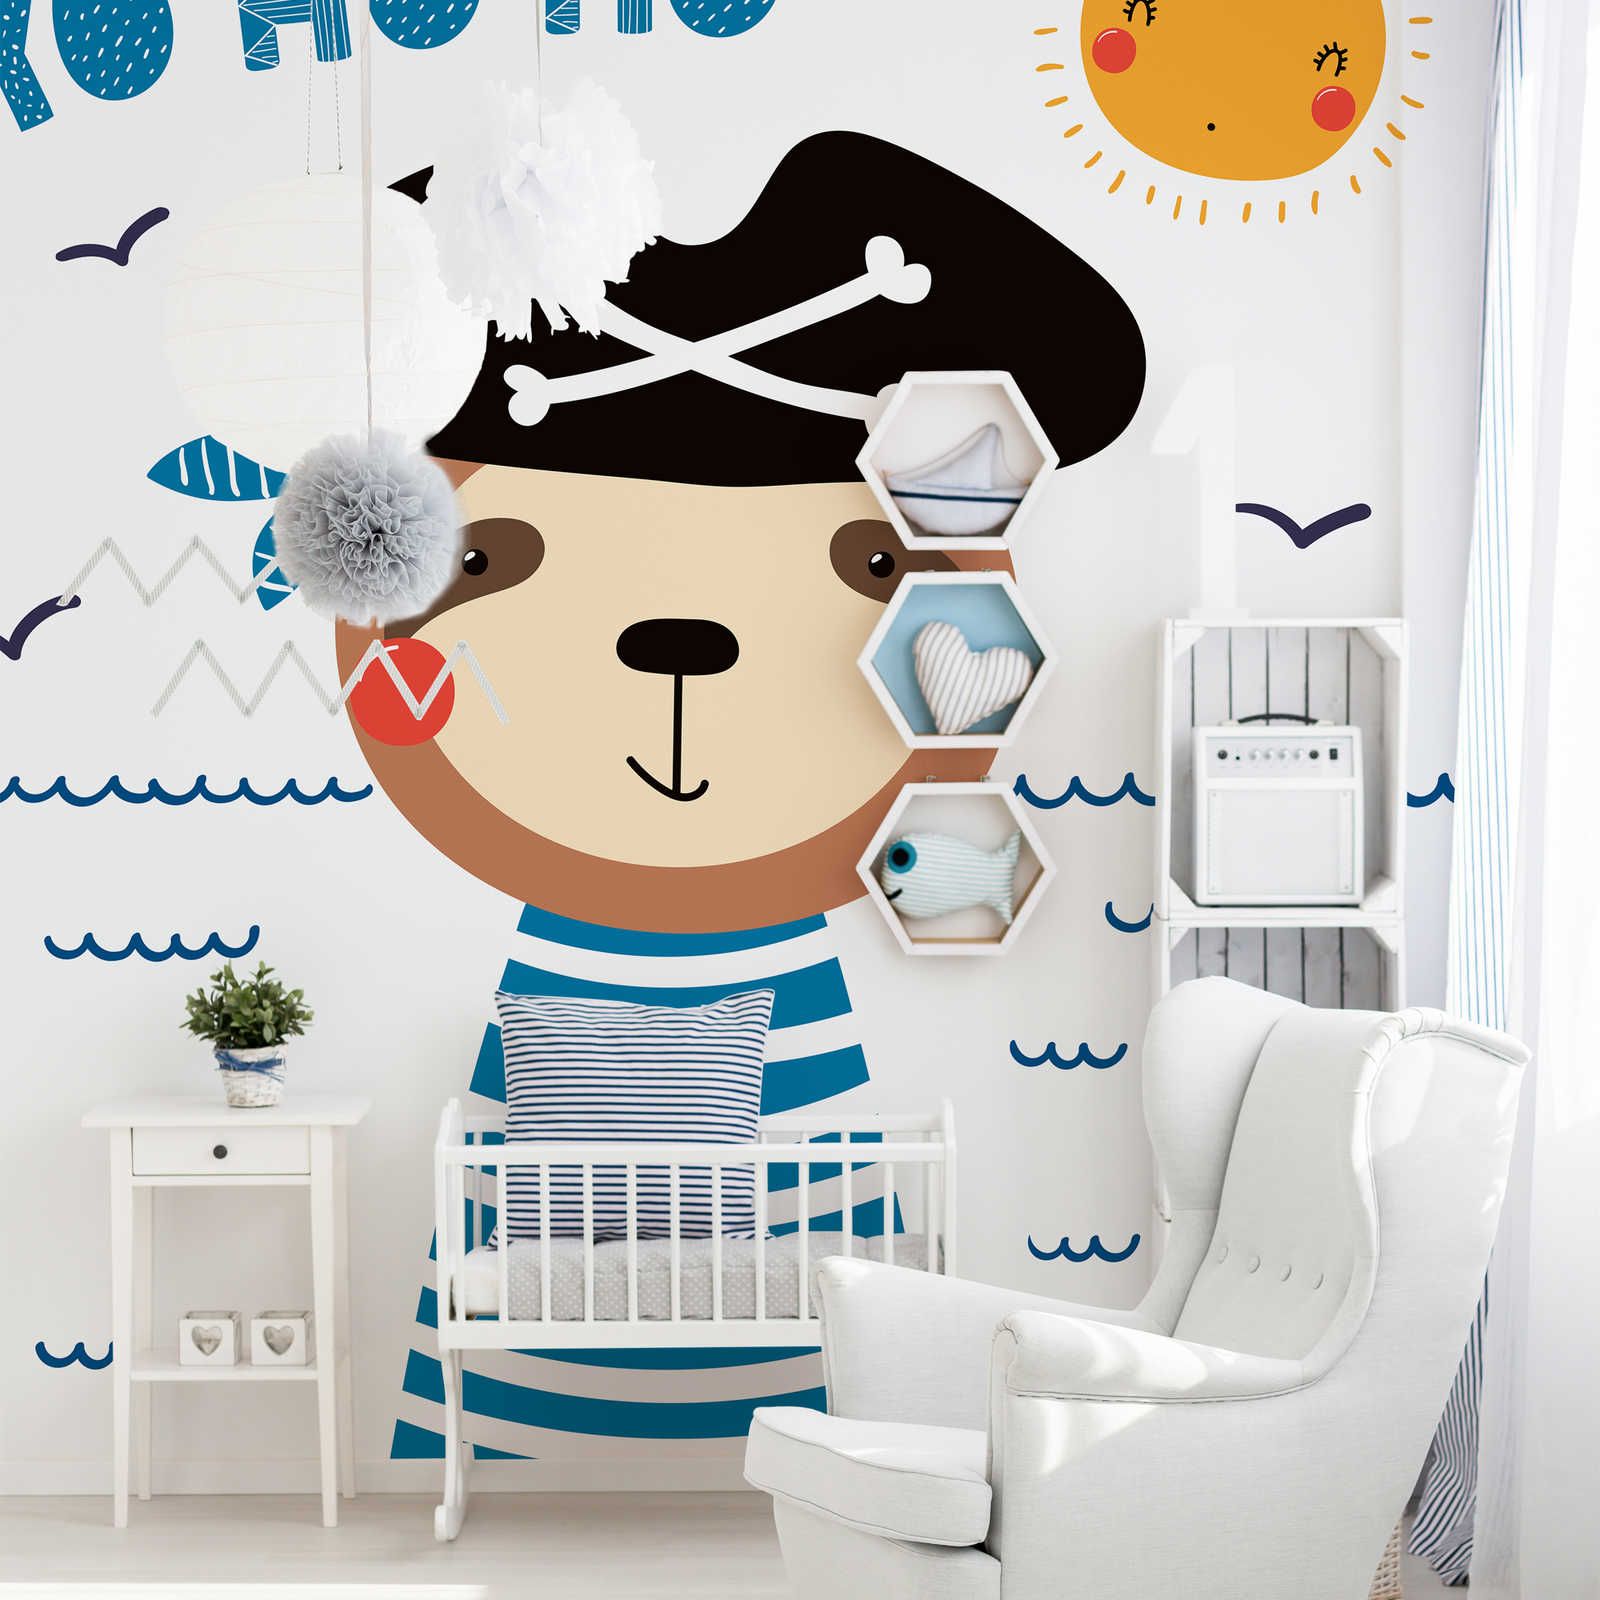 Nursery mural with bear pirate - Smooth & pearlescent fleece
